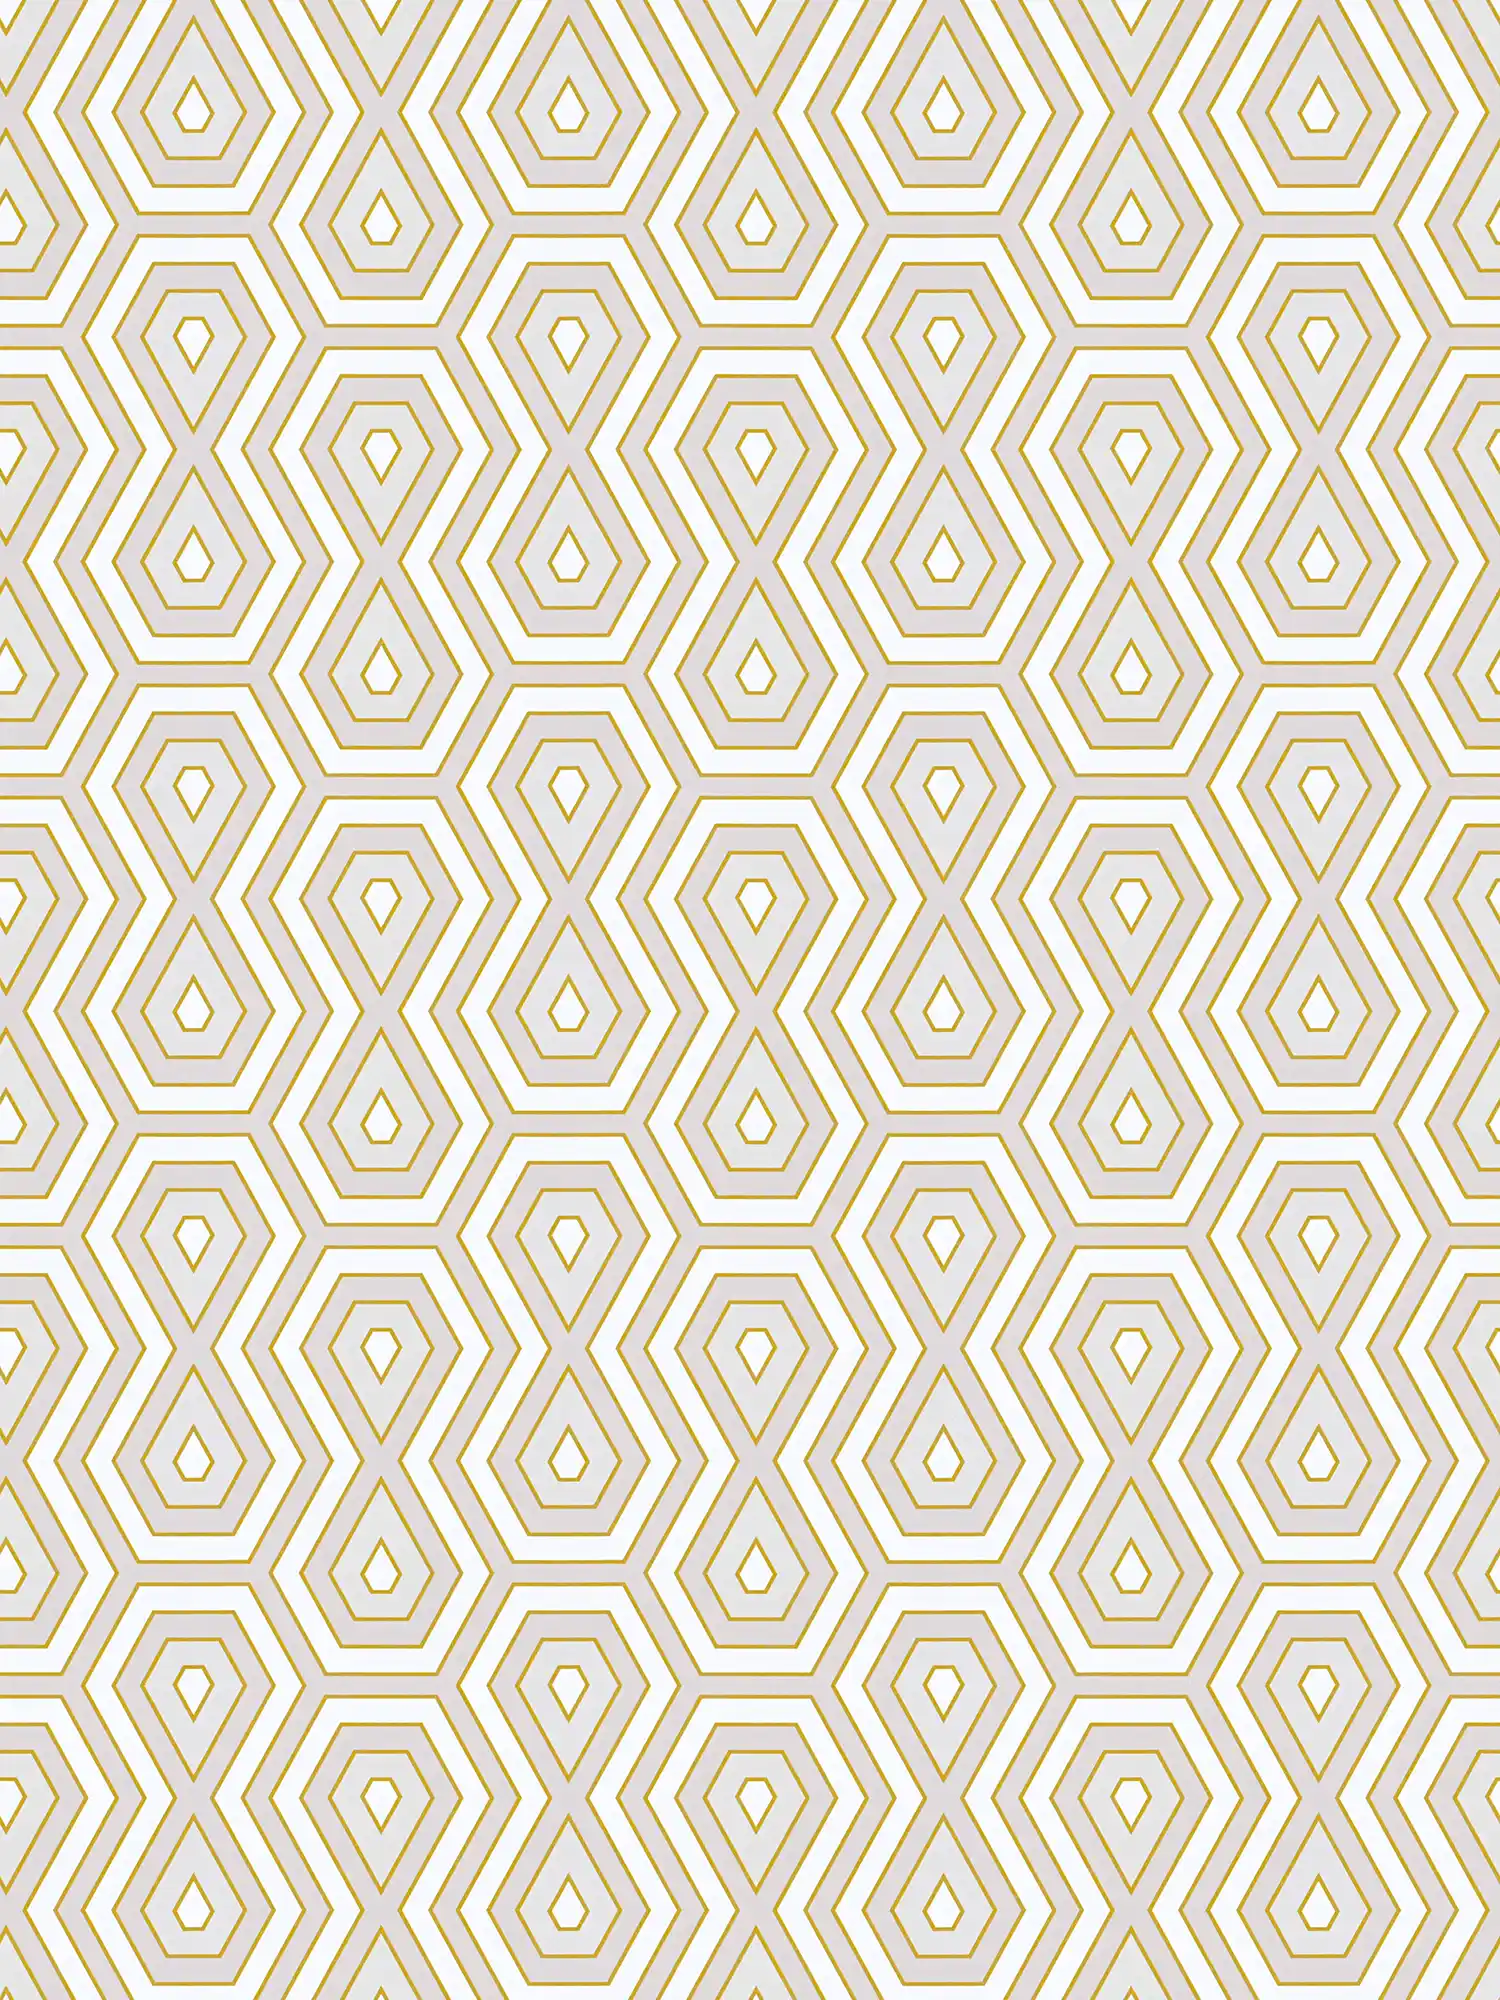 Wallpaper grey & gold with graphic design in retro style - gold, white, grey
